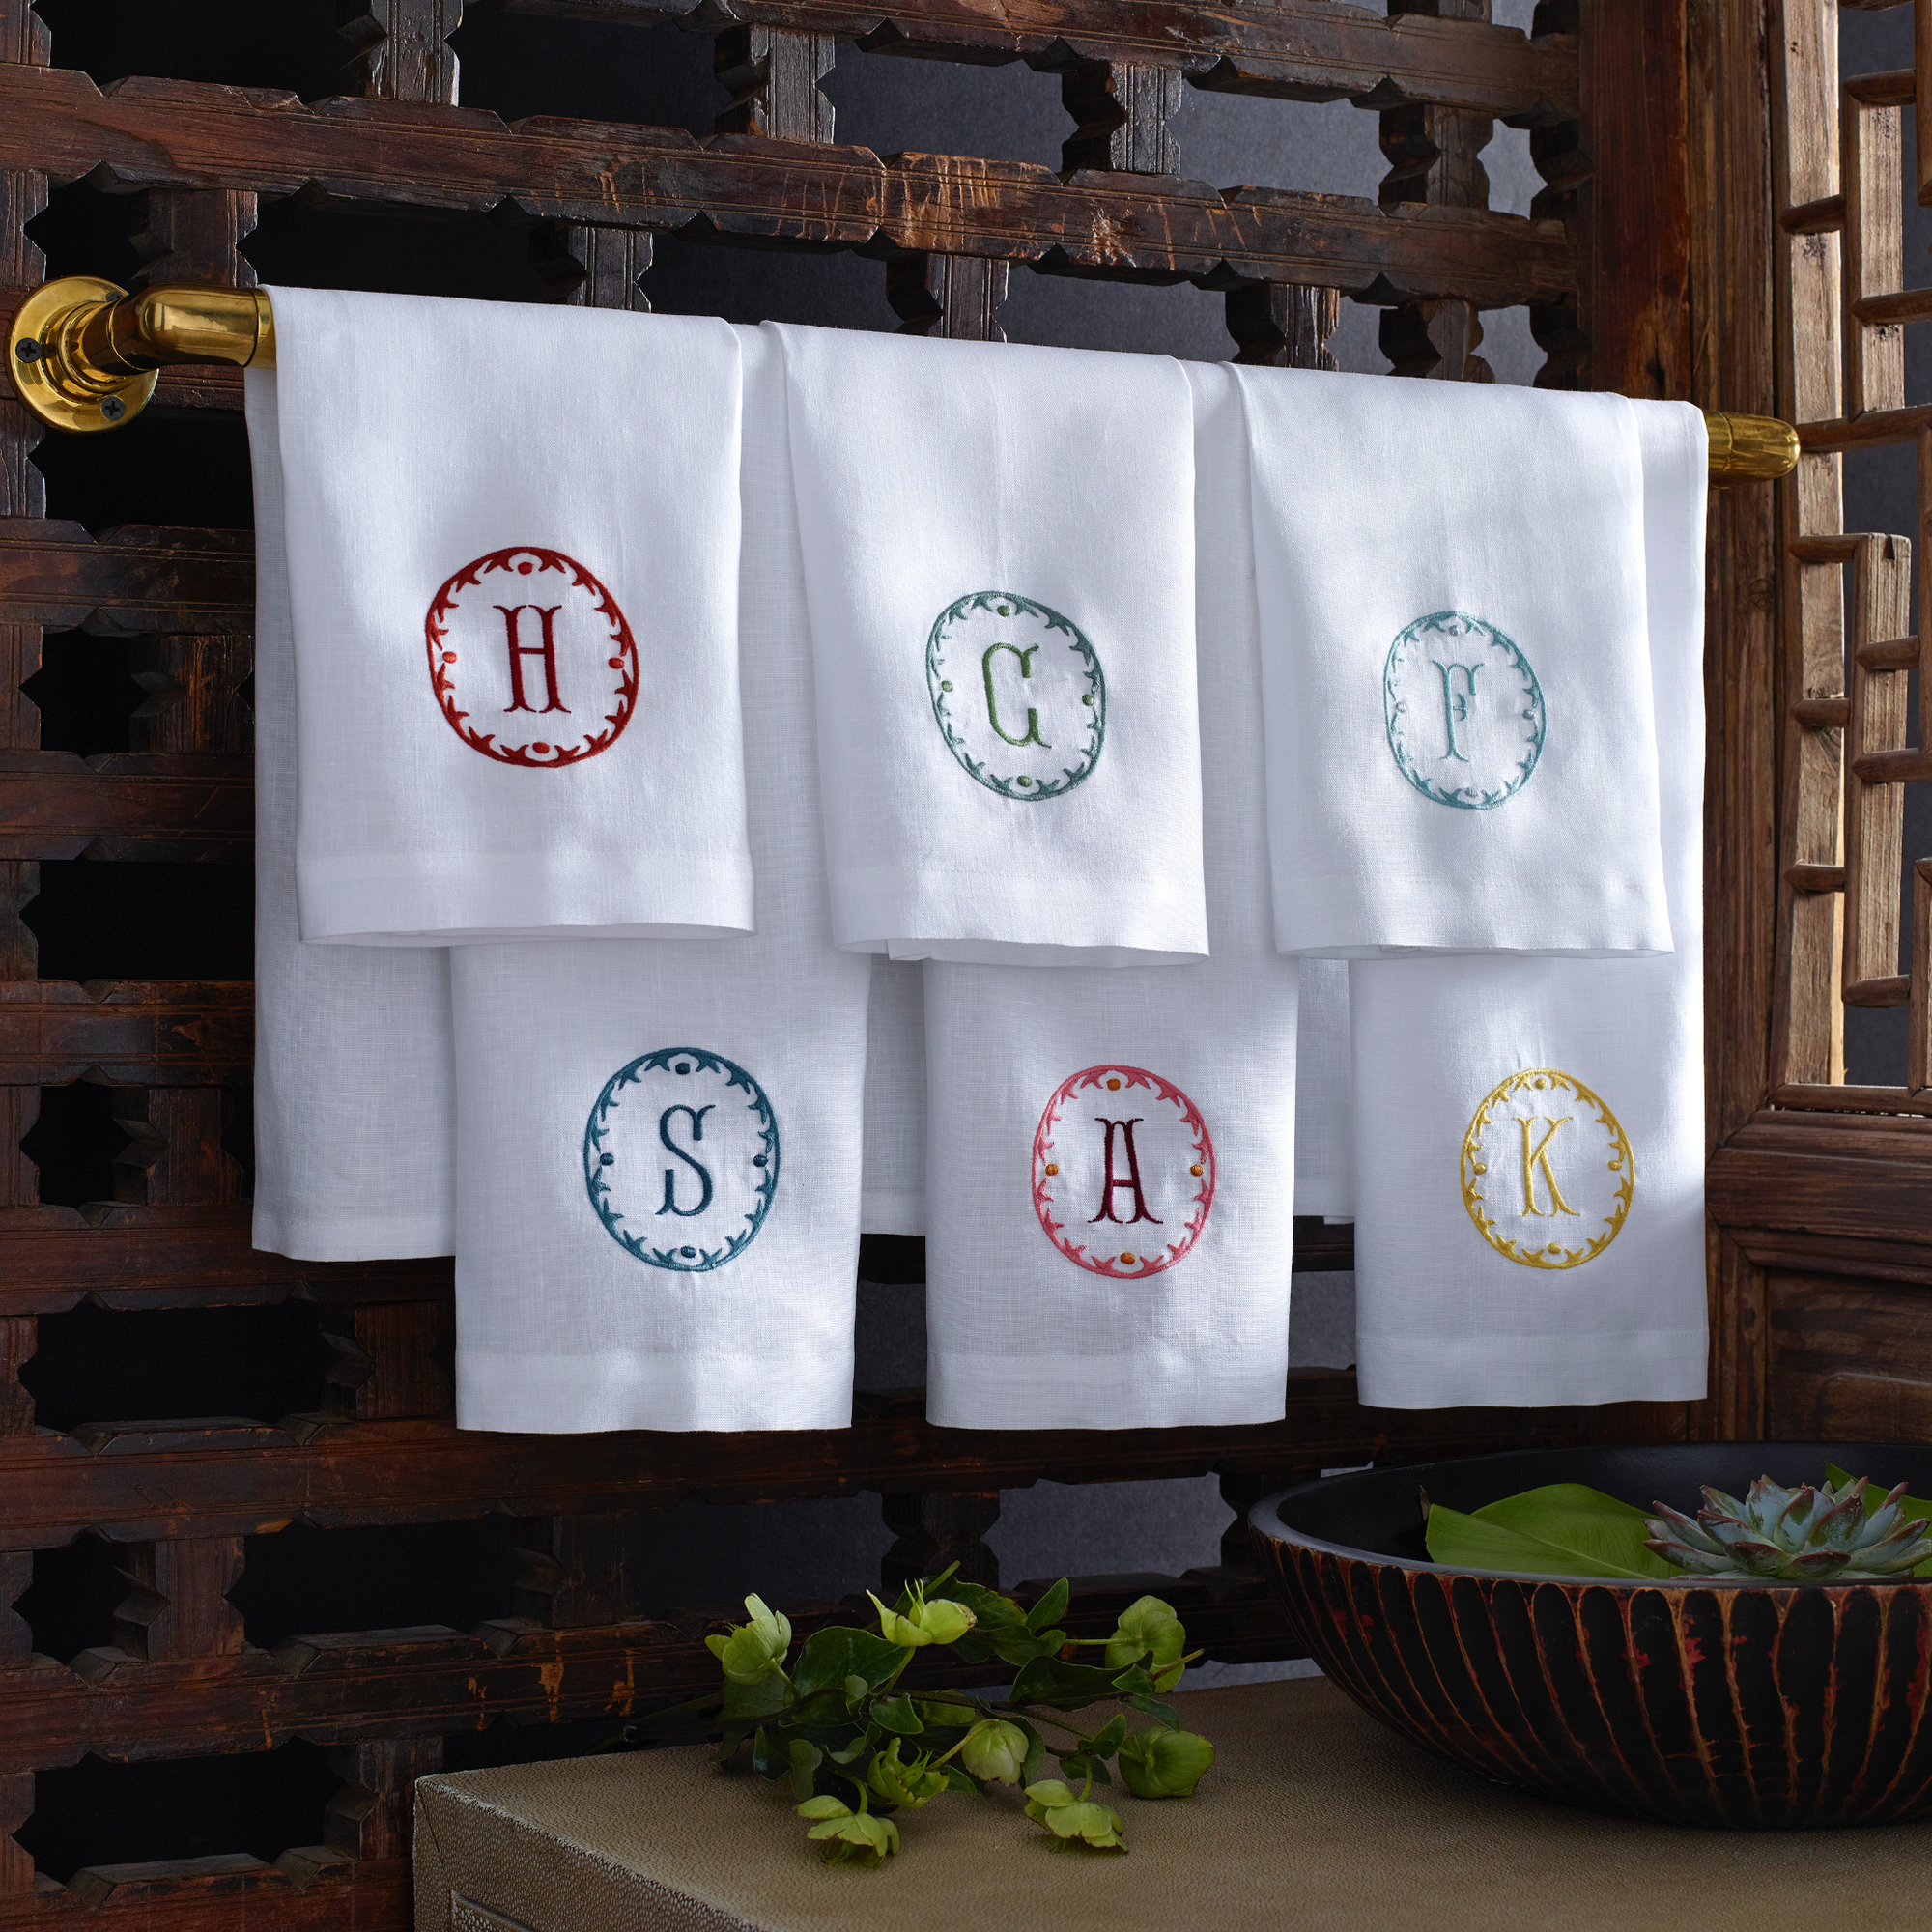 Hanging Matouk Carta Guest Towels in Different Colors and Letters